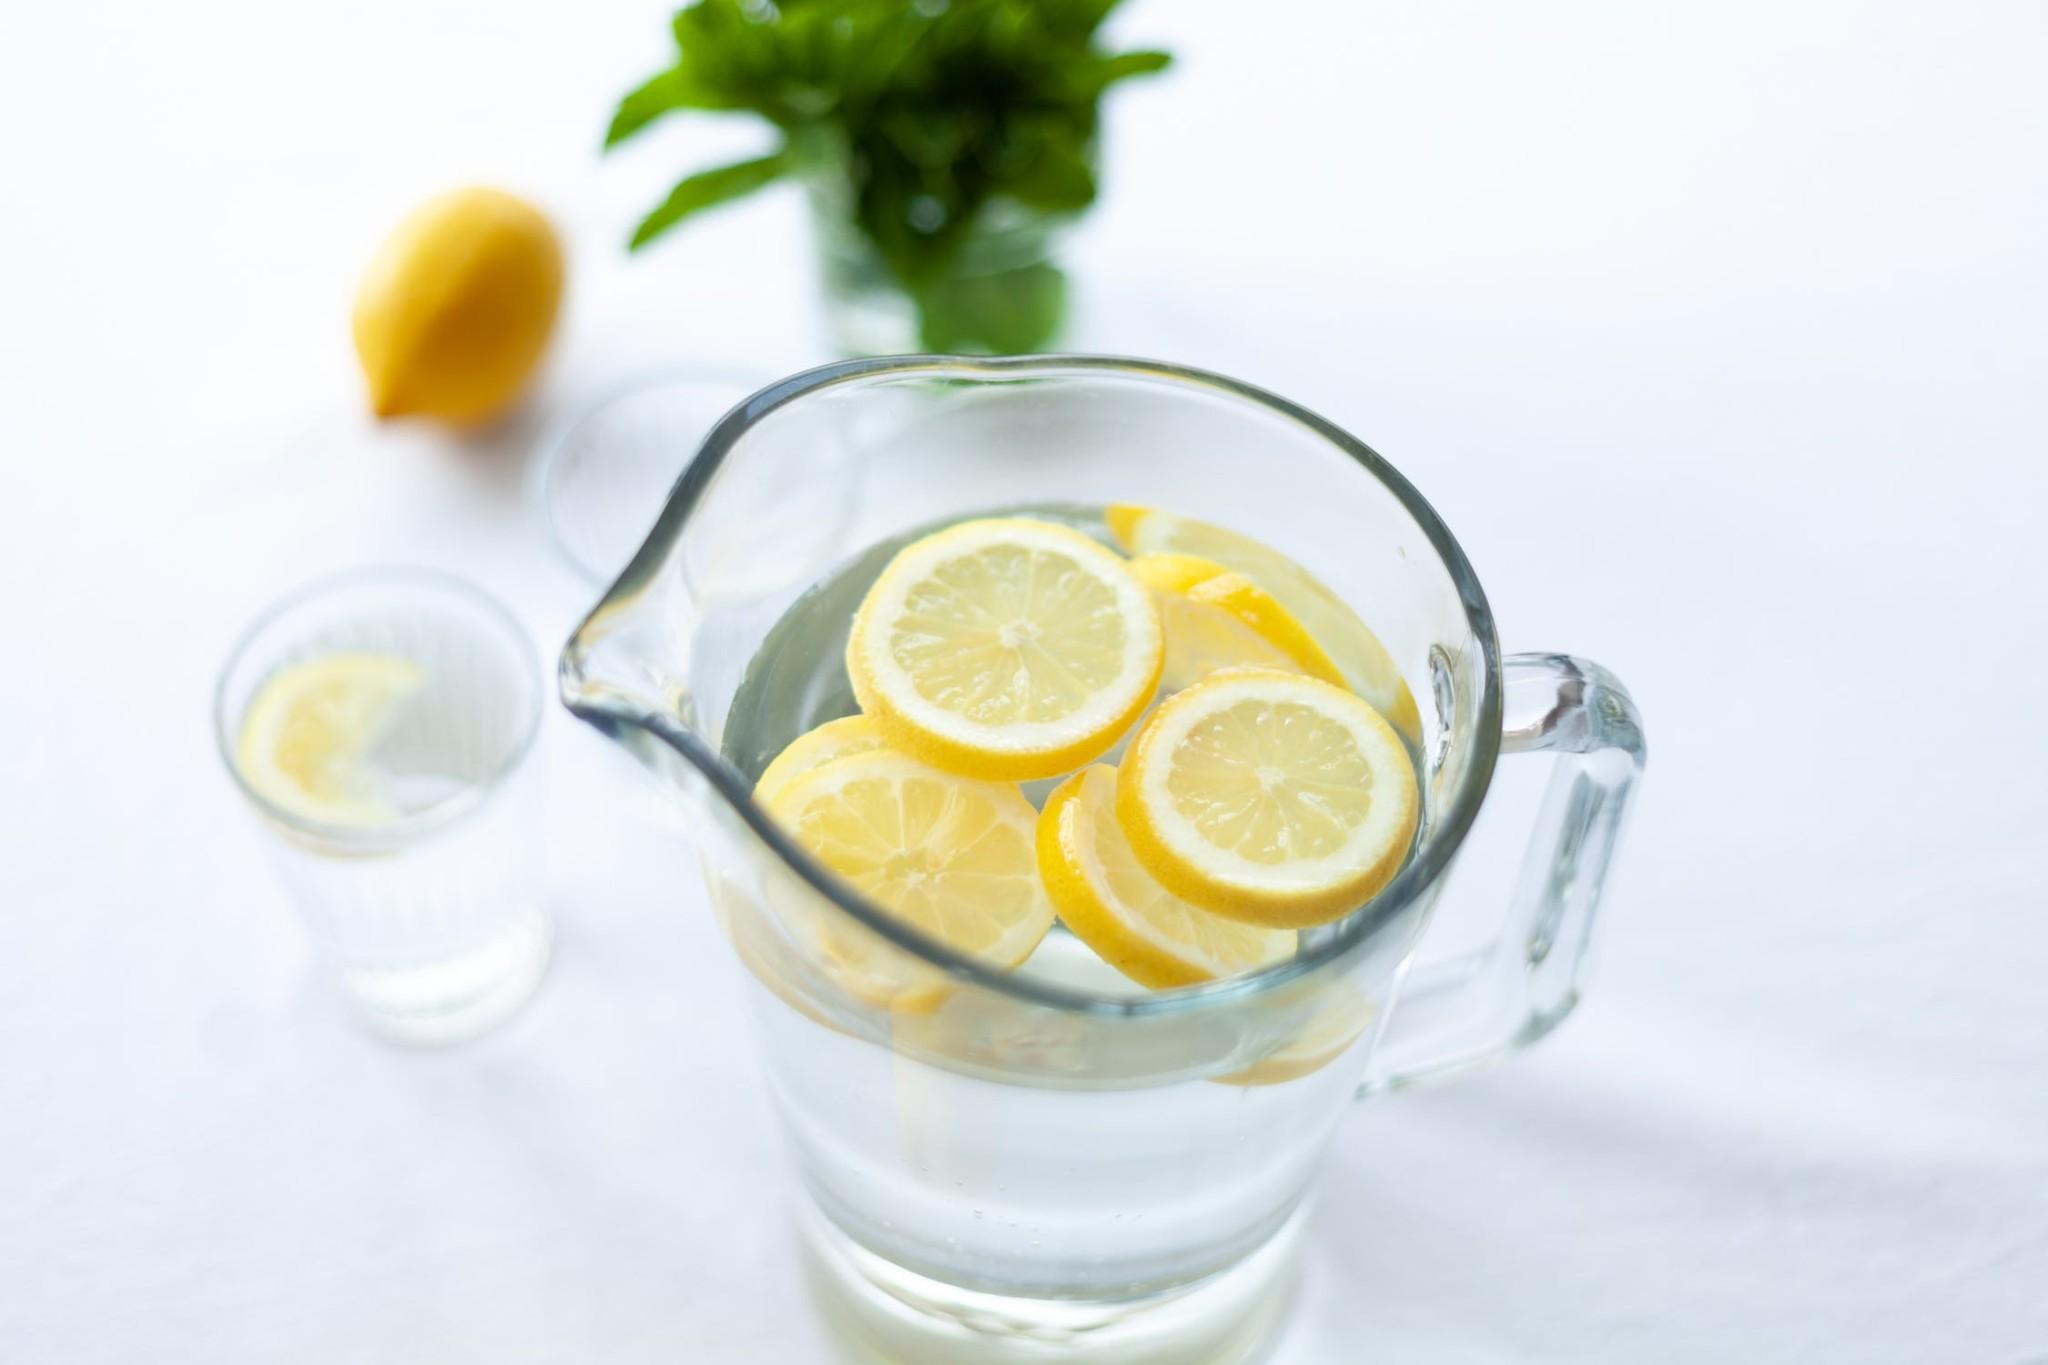 Drinking Water in Pitcher with Lemons